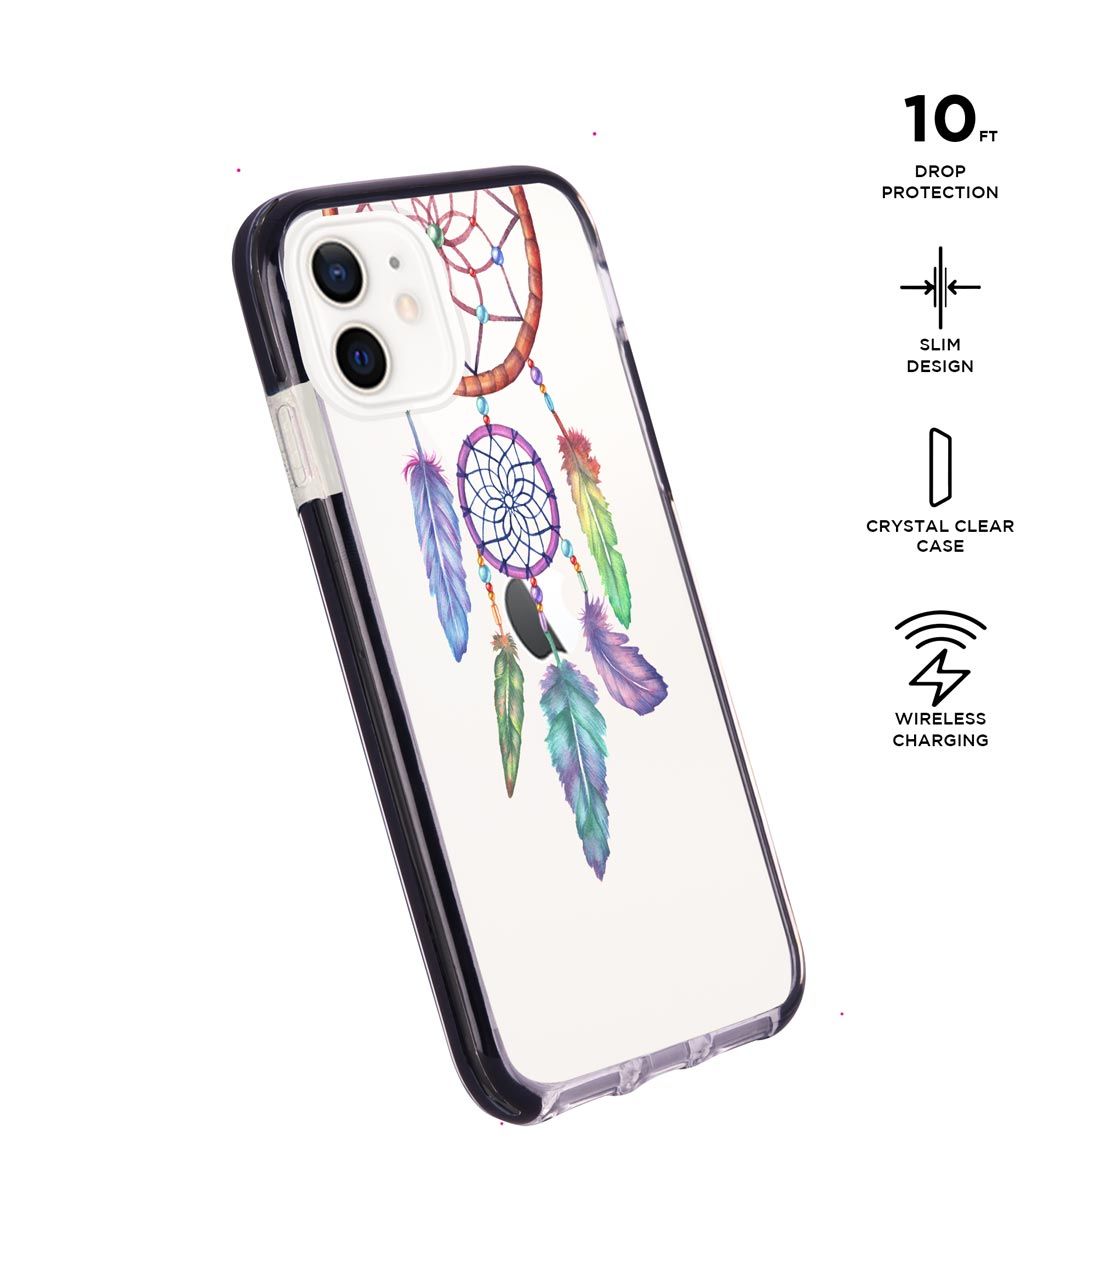 Dream Catcher Feathers - Extreme Case for iPhone 12